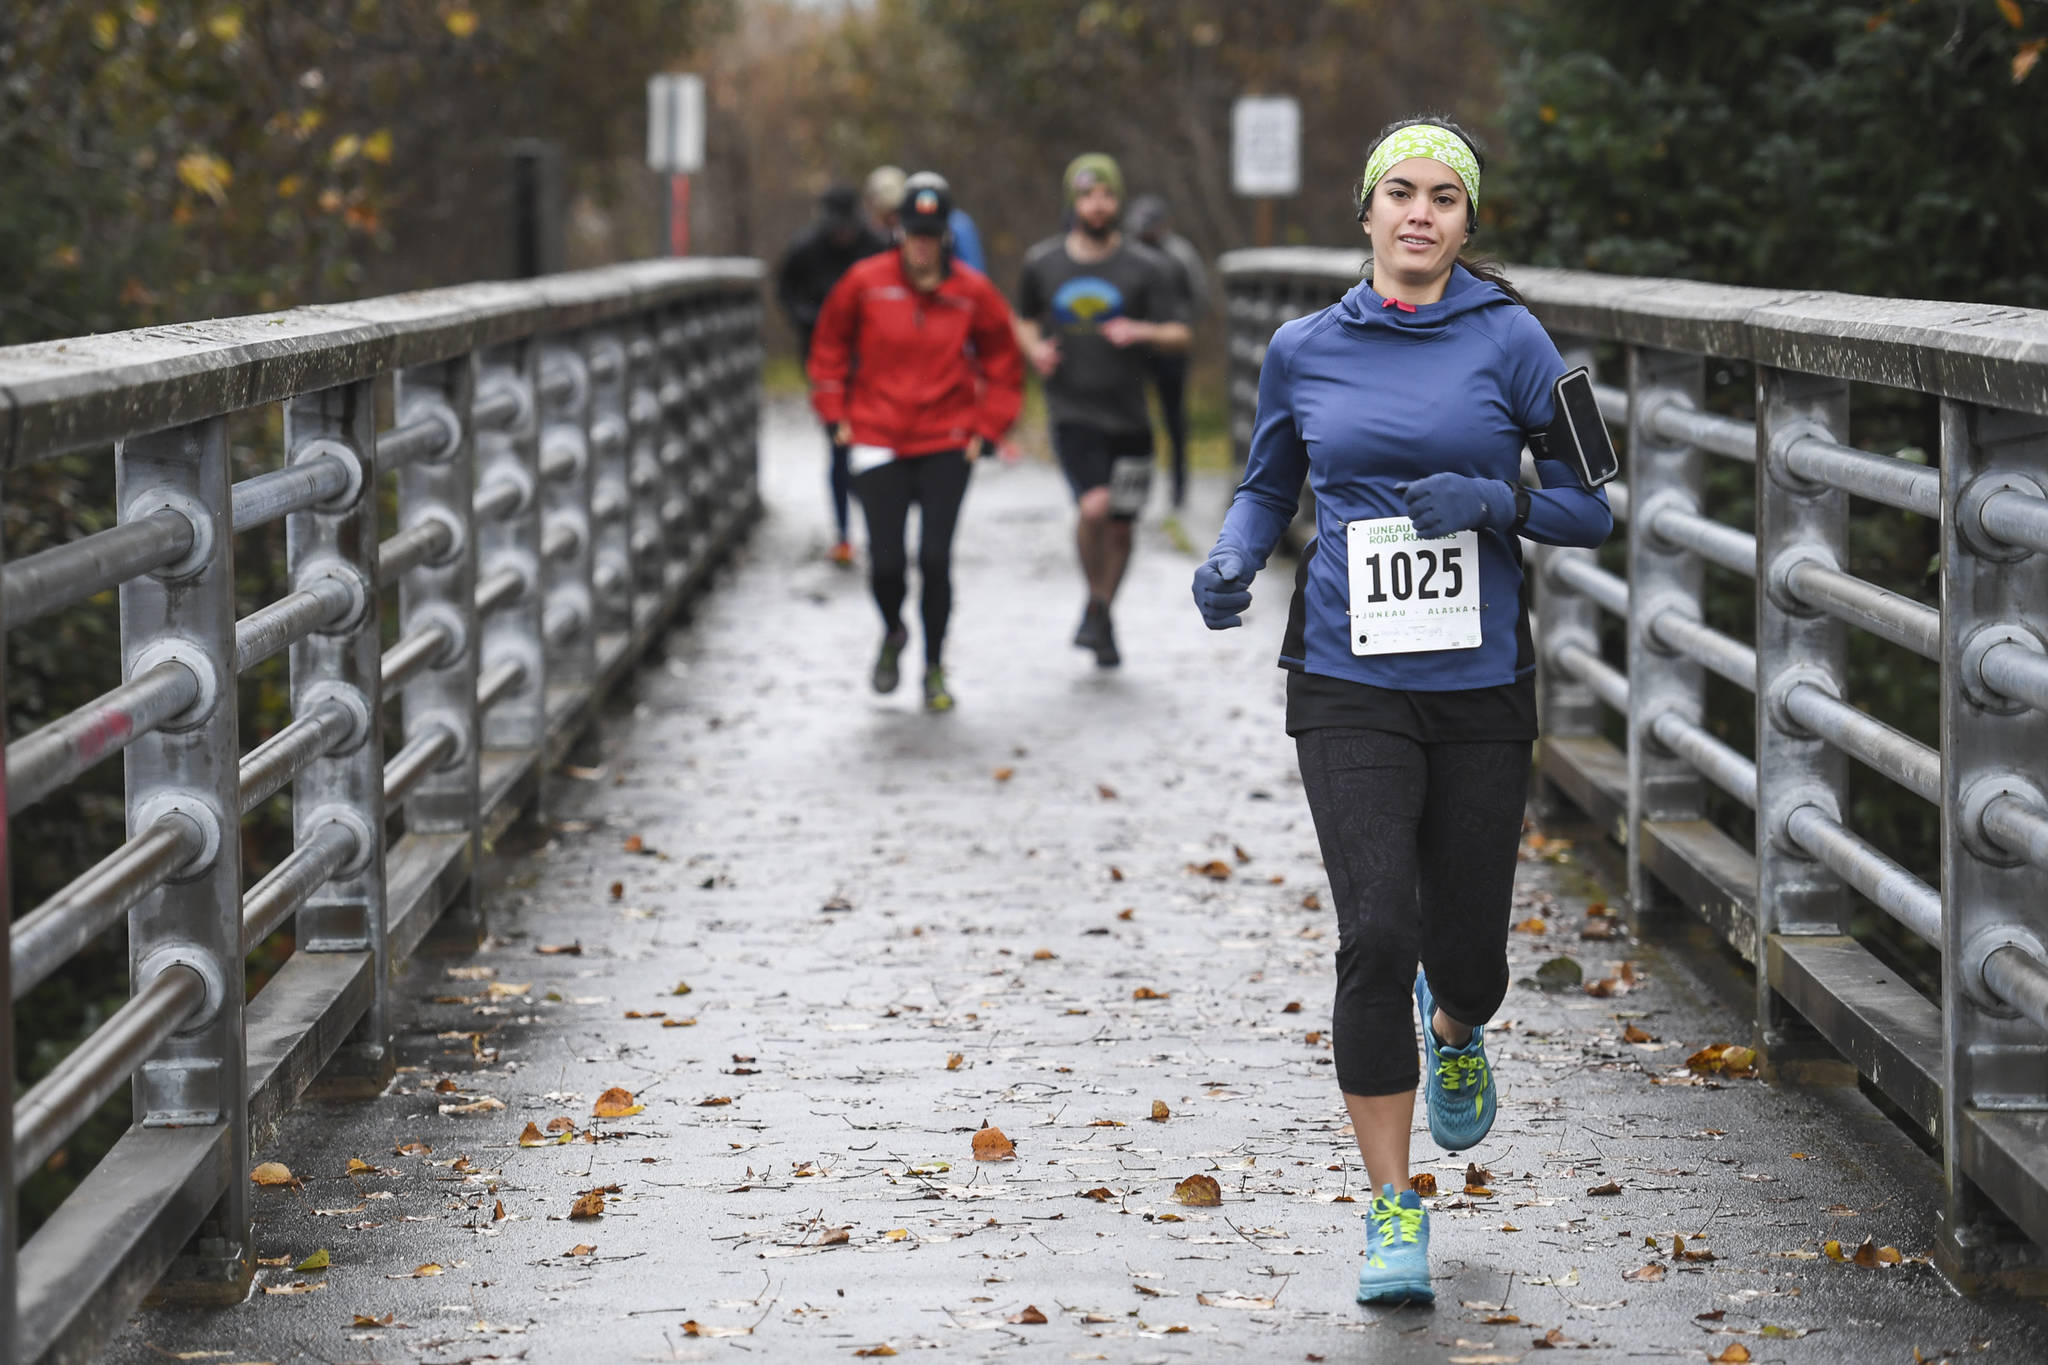 Danielle Dunivin participates in the annual community mental health run, the Extra Tough 5K & 1 Mile Run, on Saturday, Oct. 12, 2019, starting at Riverbend Elementary School. The run is sponsored by National Alliance on Mental Illness (NAMI) Juneau. (Michael Penn | Juneau Empire)